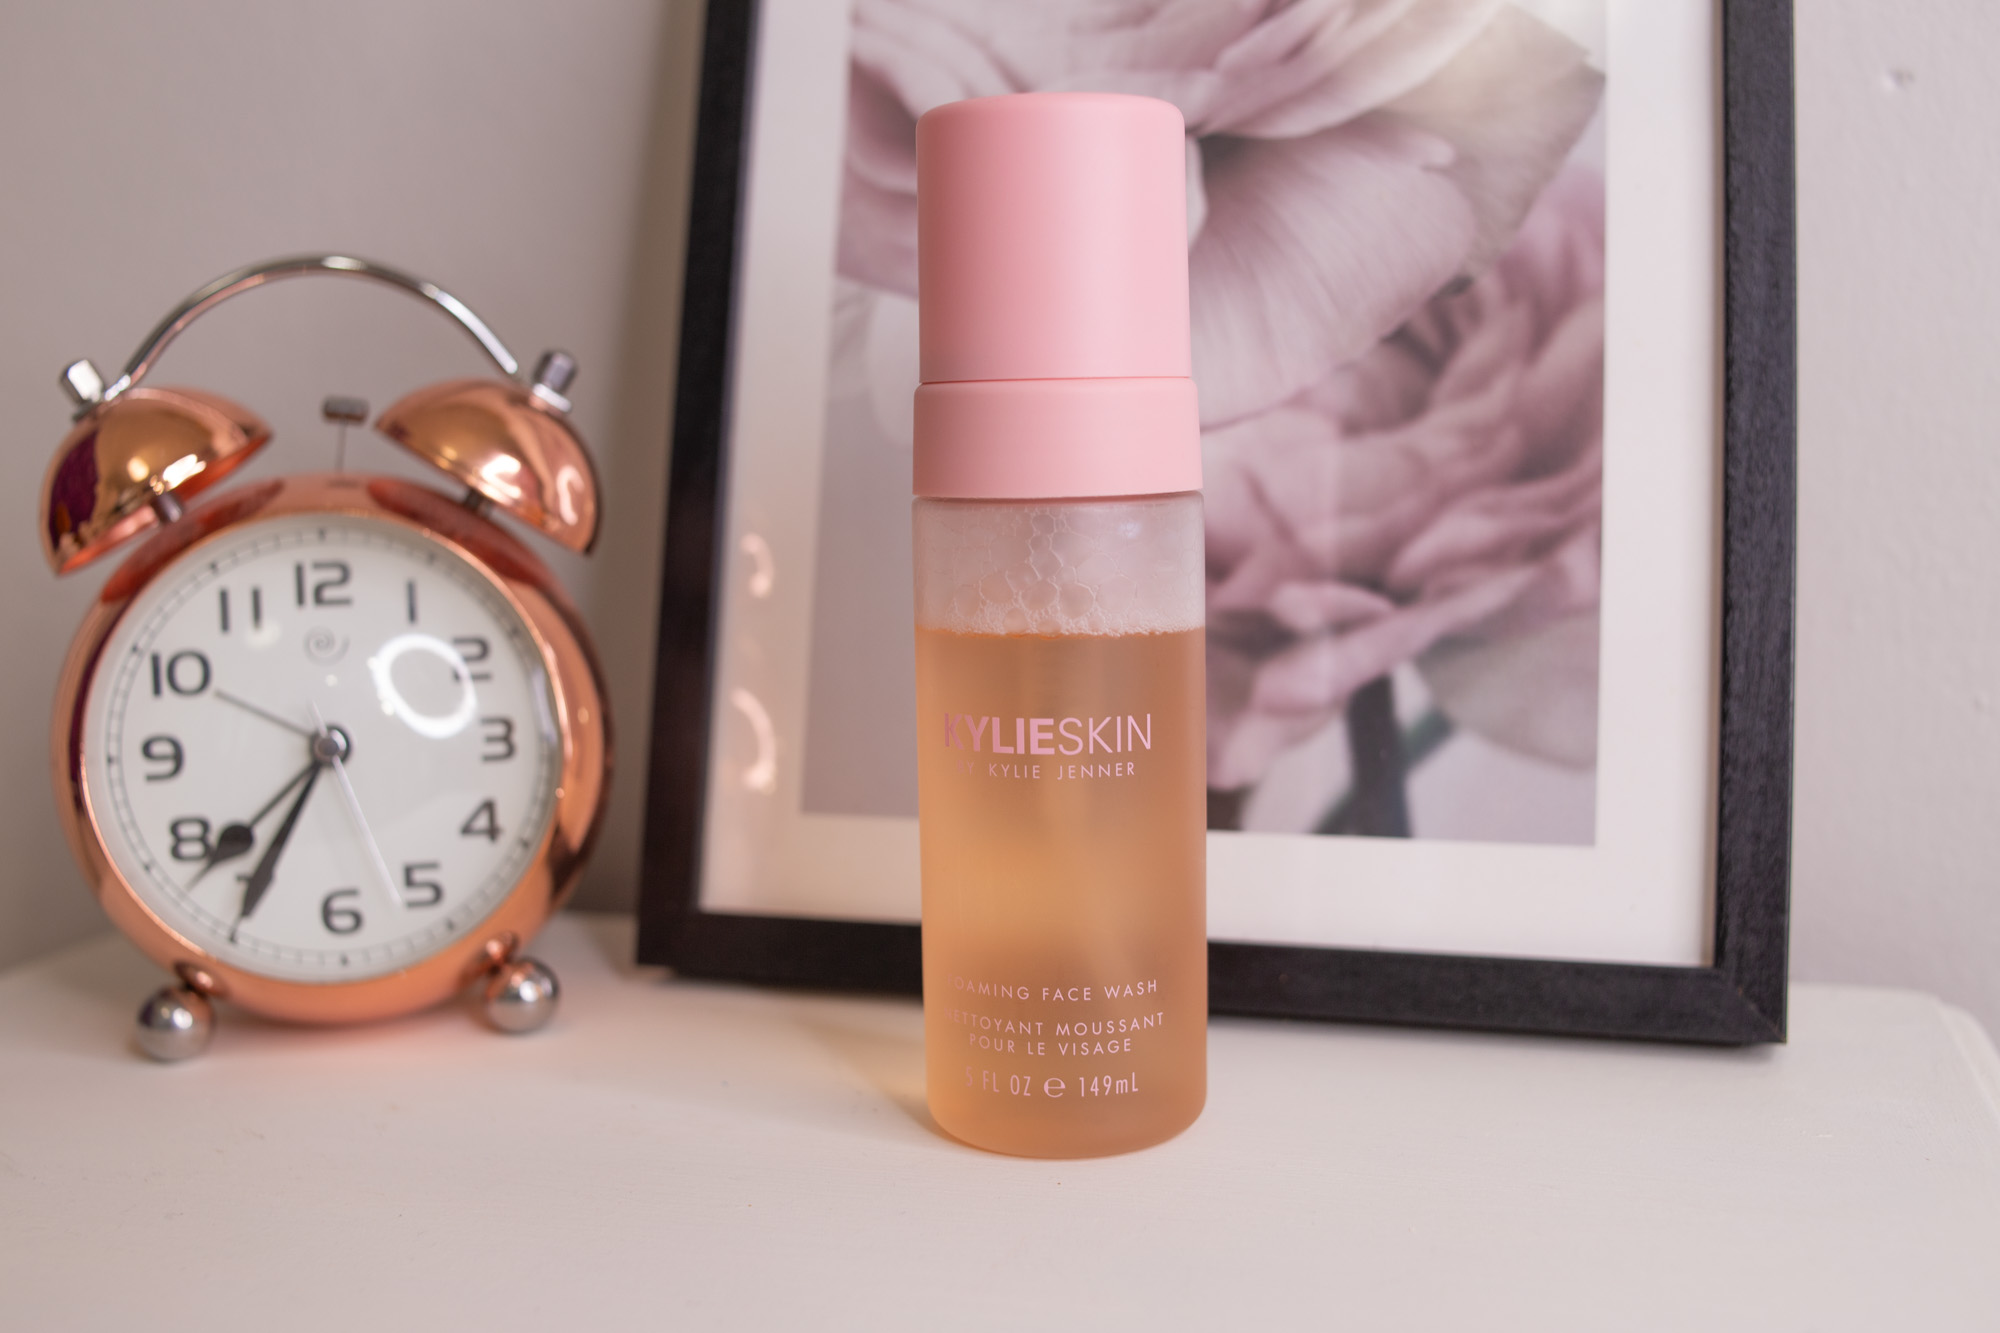 Foaming Face Wash Kylie Skin recensione